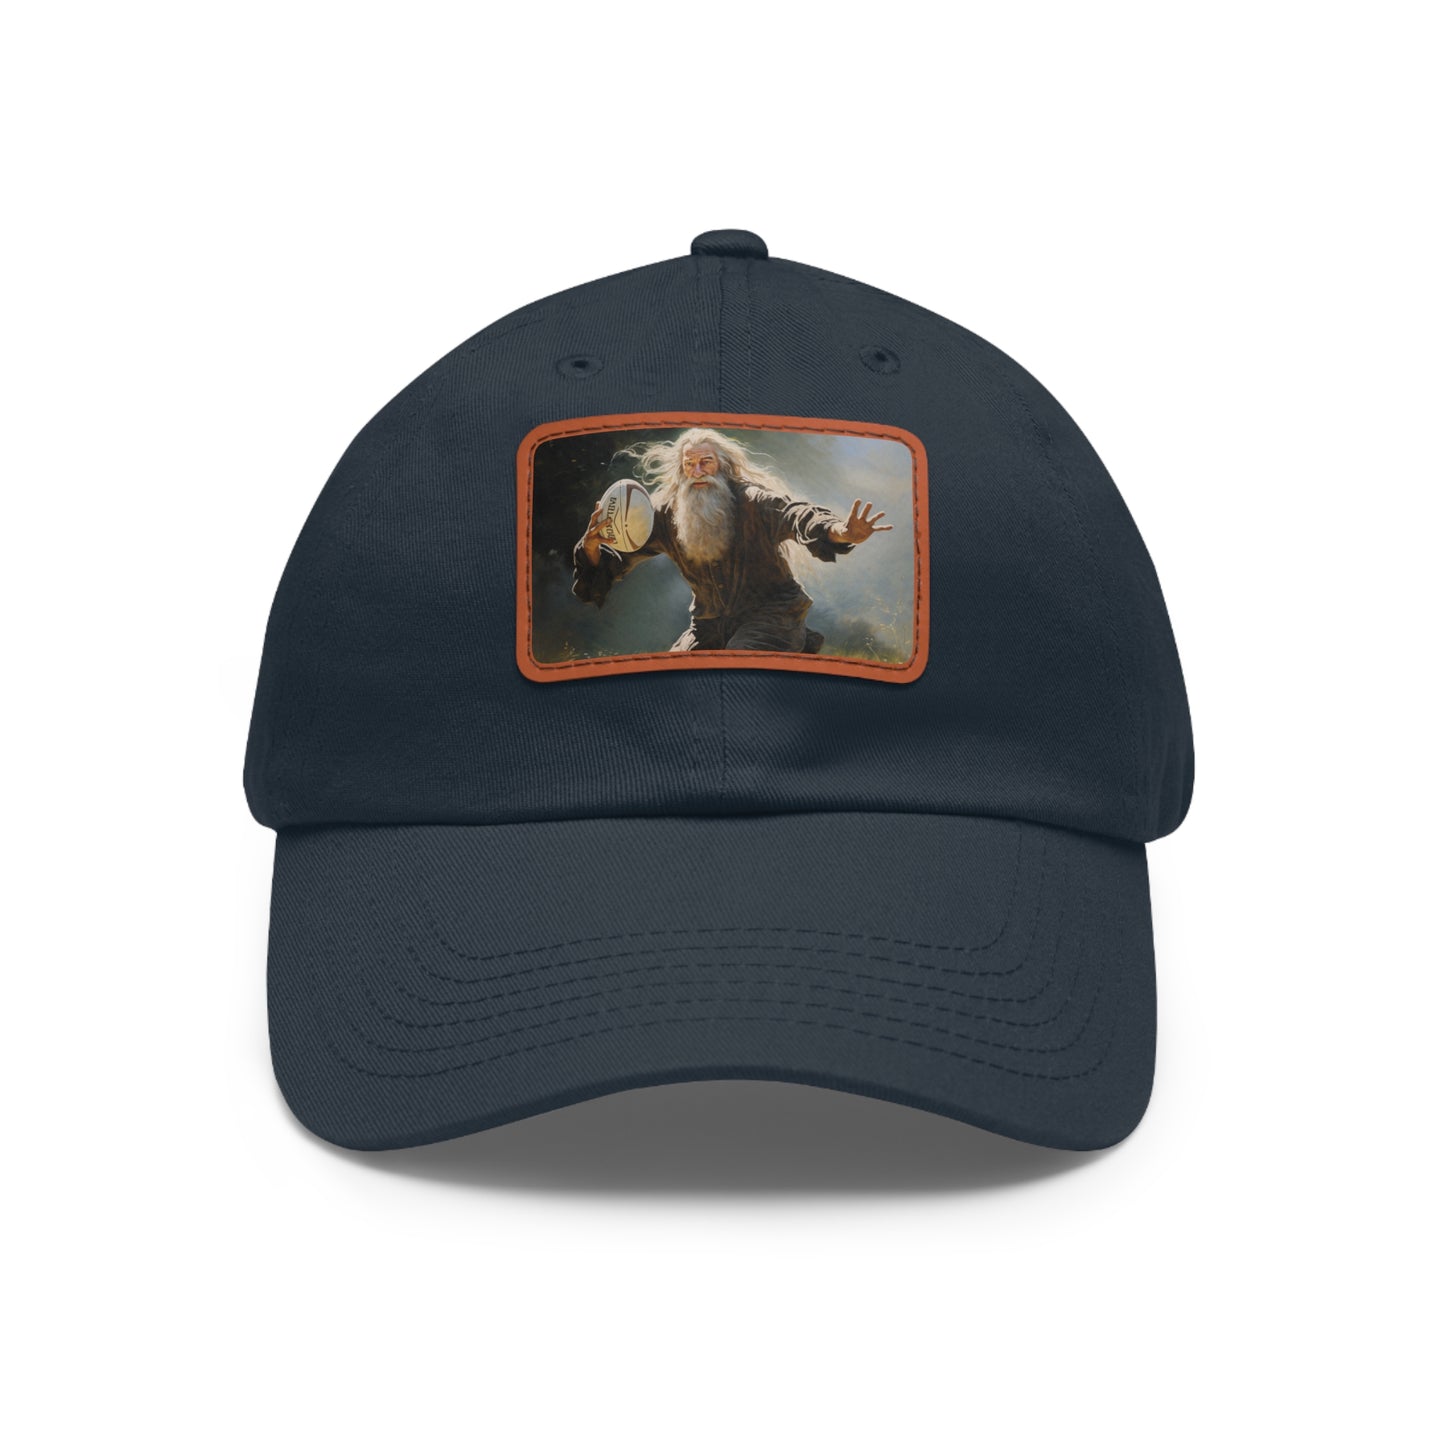 Gandalf Rectangle Patch hat